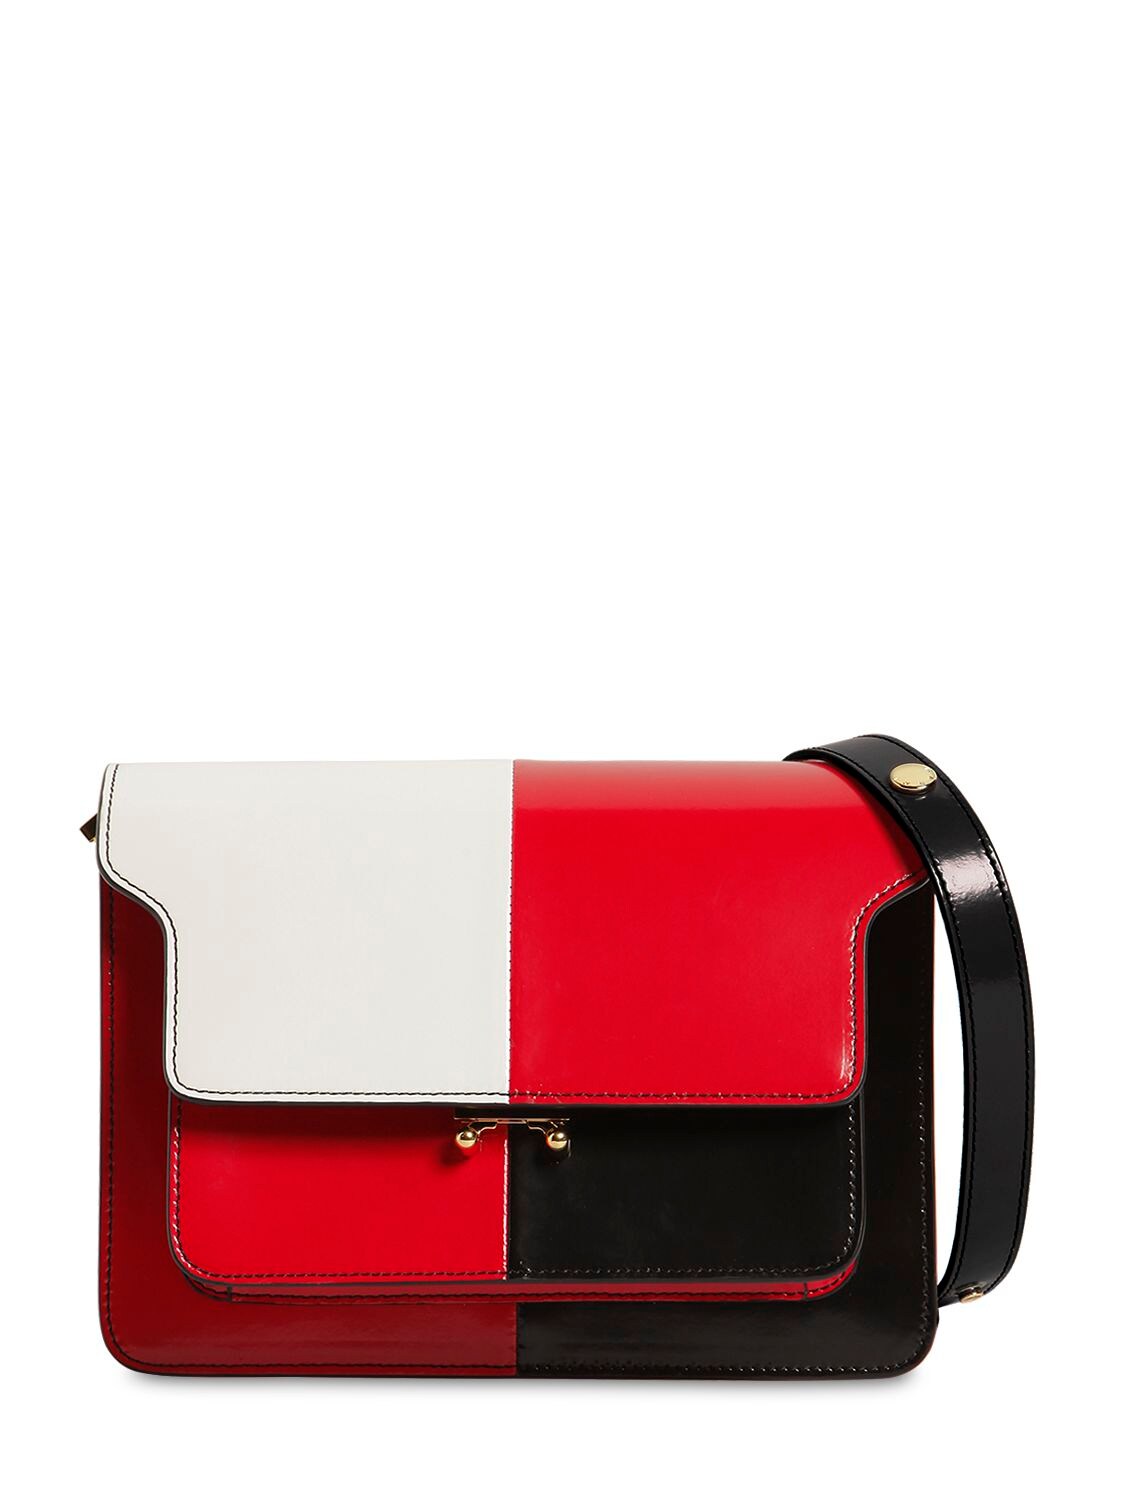 Marni Medium Trunk Color Block Leather Bag In Black,red,white